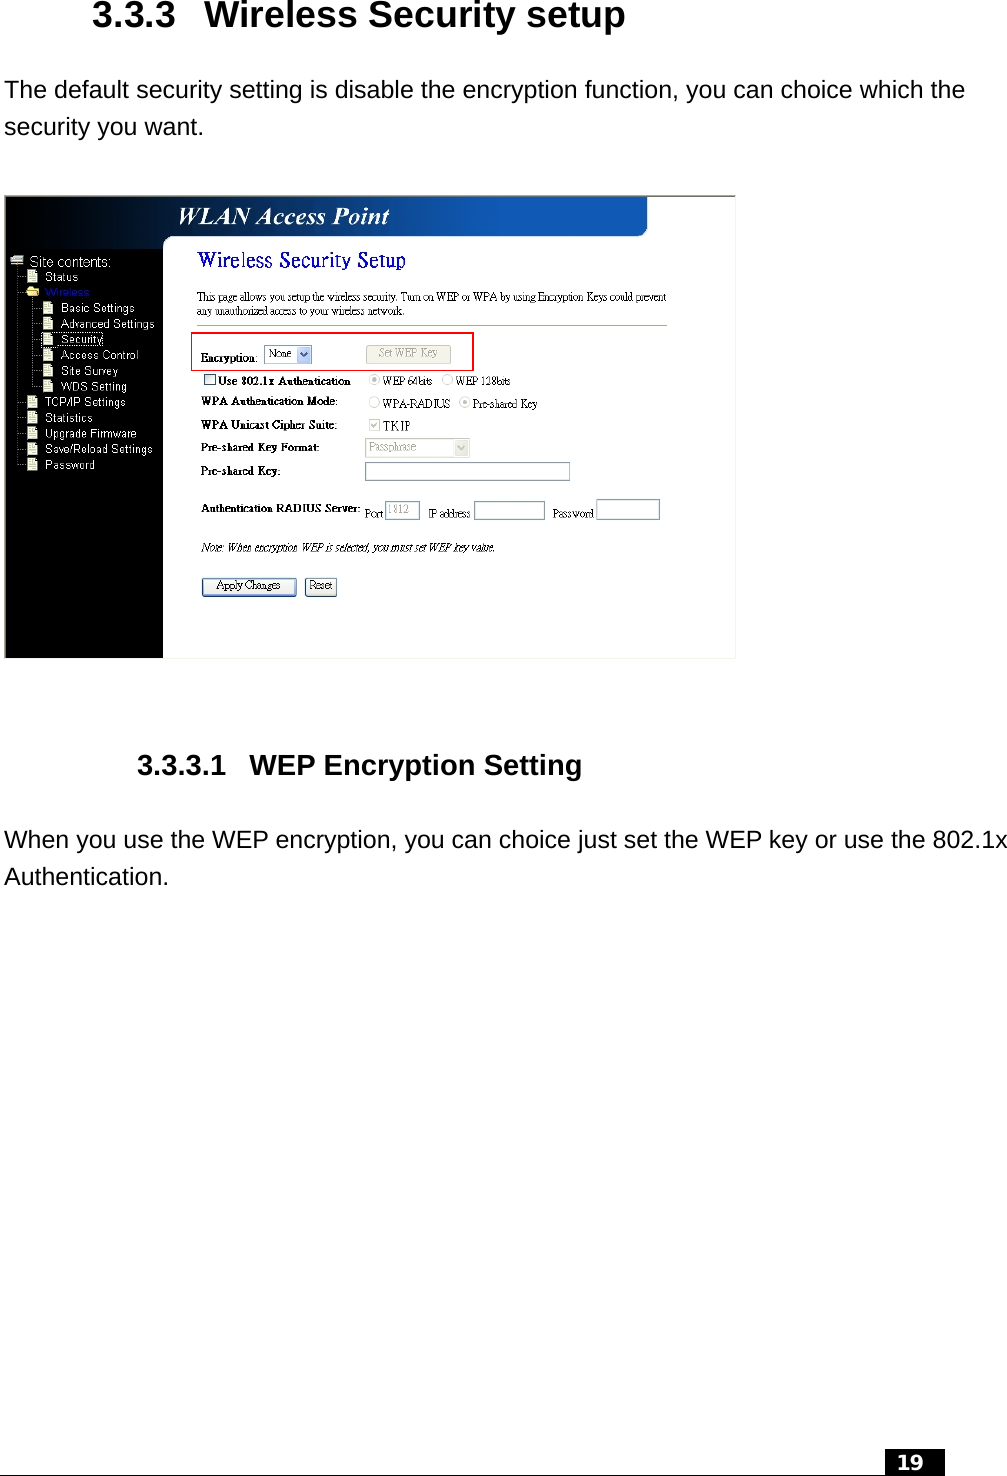 3.3.3  Wireless Security setup The default security setting is disable the encryption function, you can choice which the security you want.    3.3.3.1 WEP Encryption Setting When you use the WEP encryption, you can choice just set the WEP key or use the 802.1x Authentication.   19  